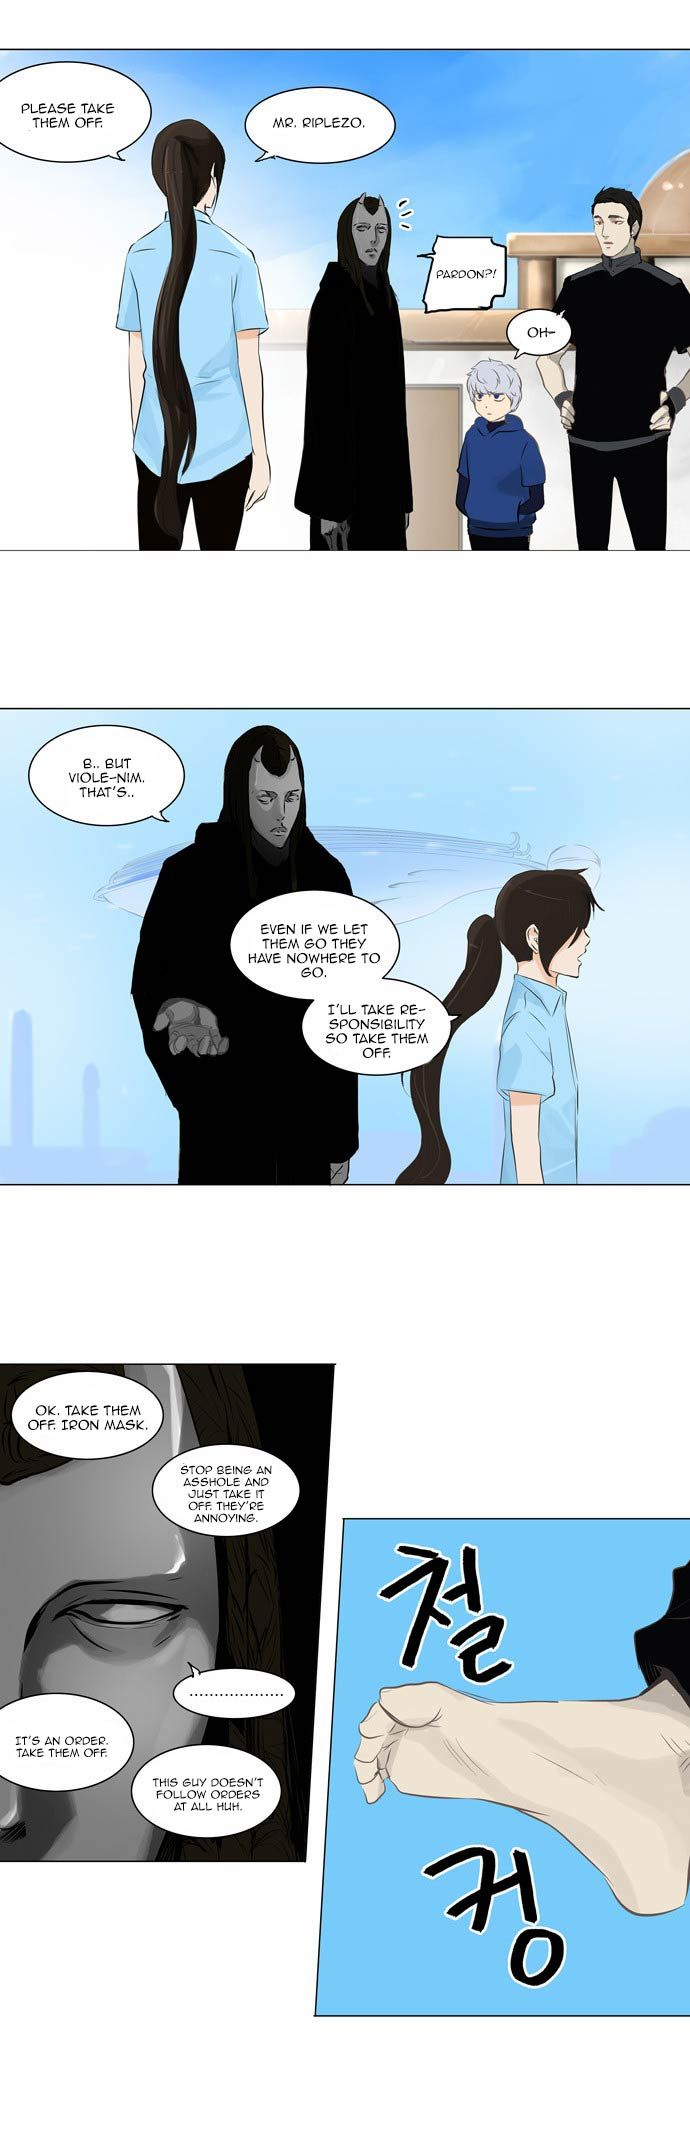 Tower of God 136